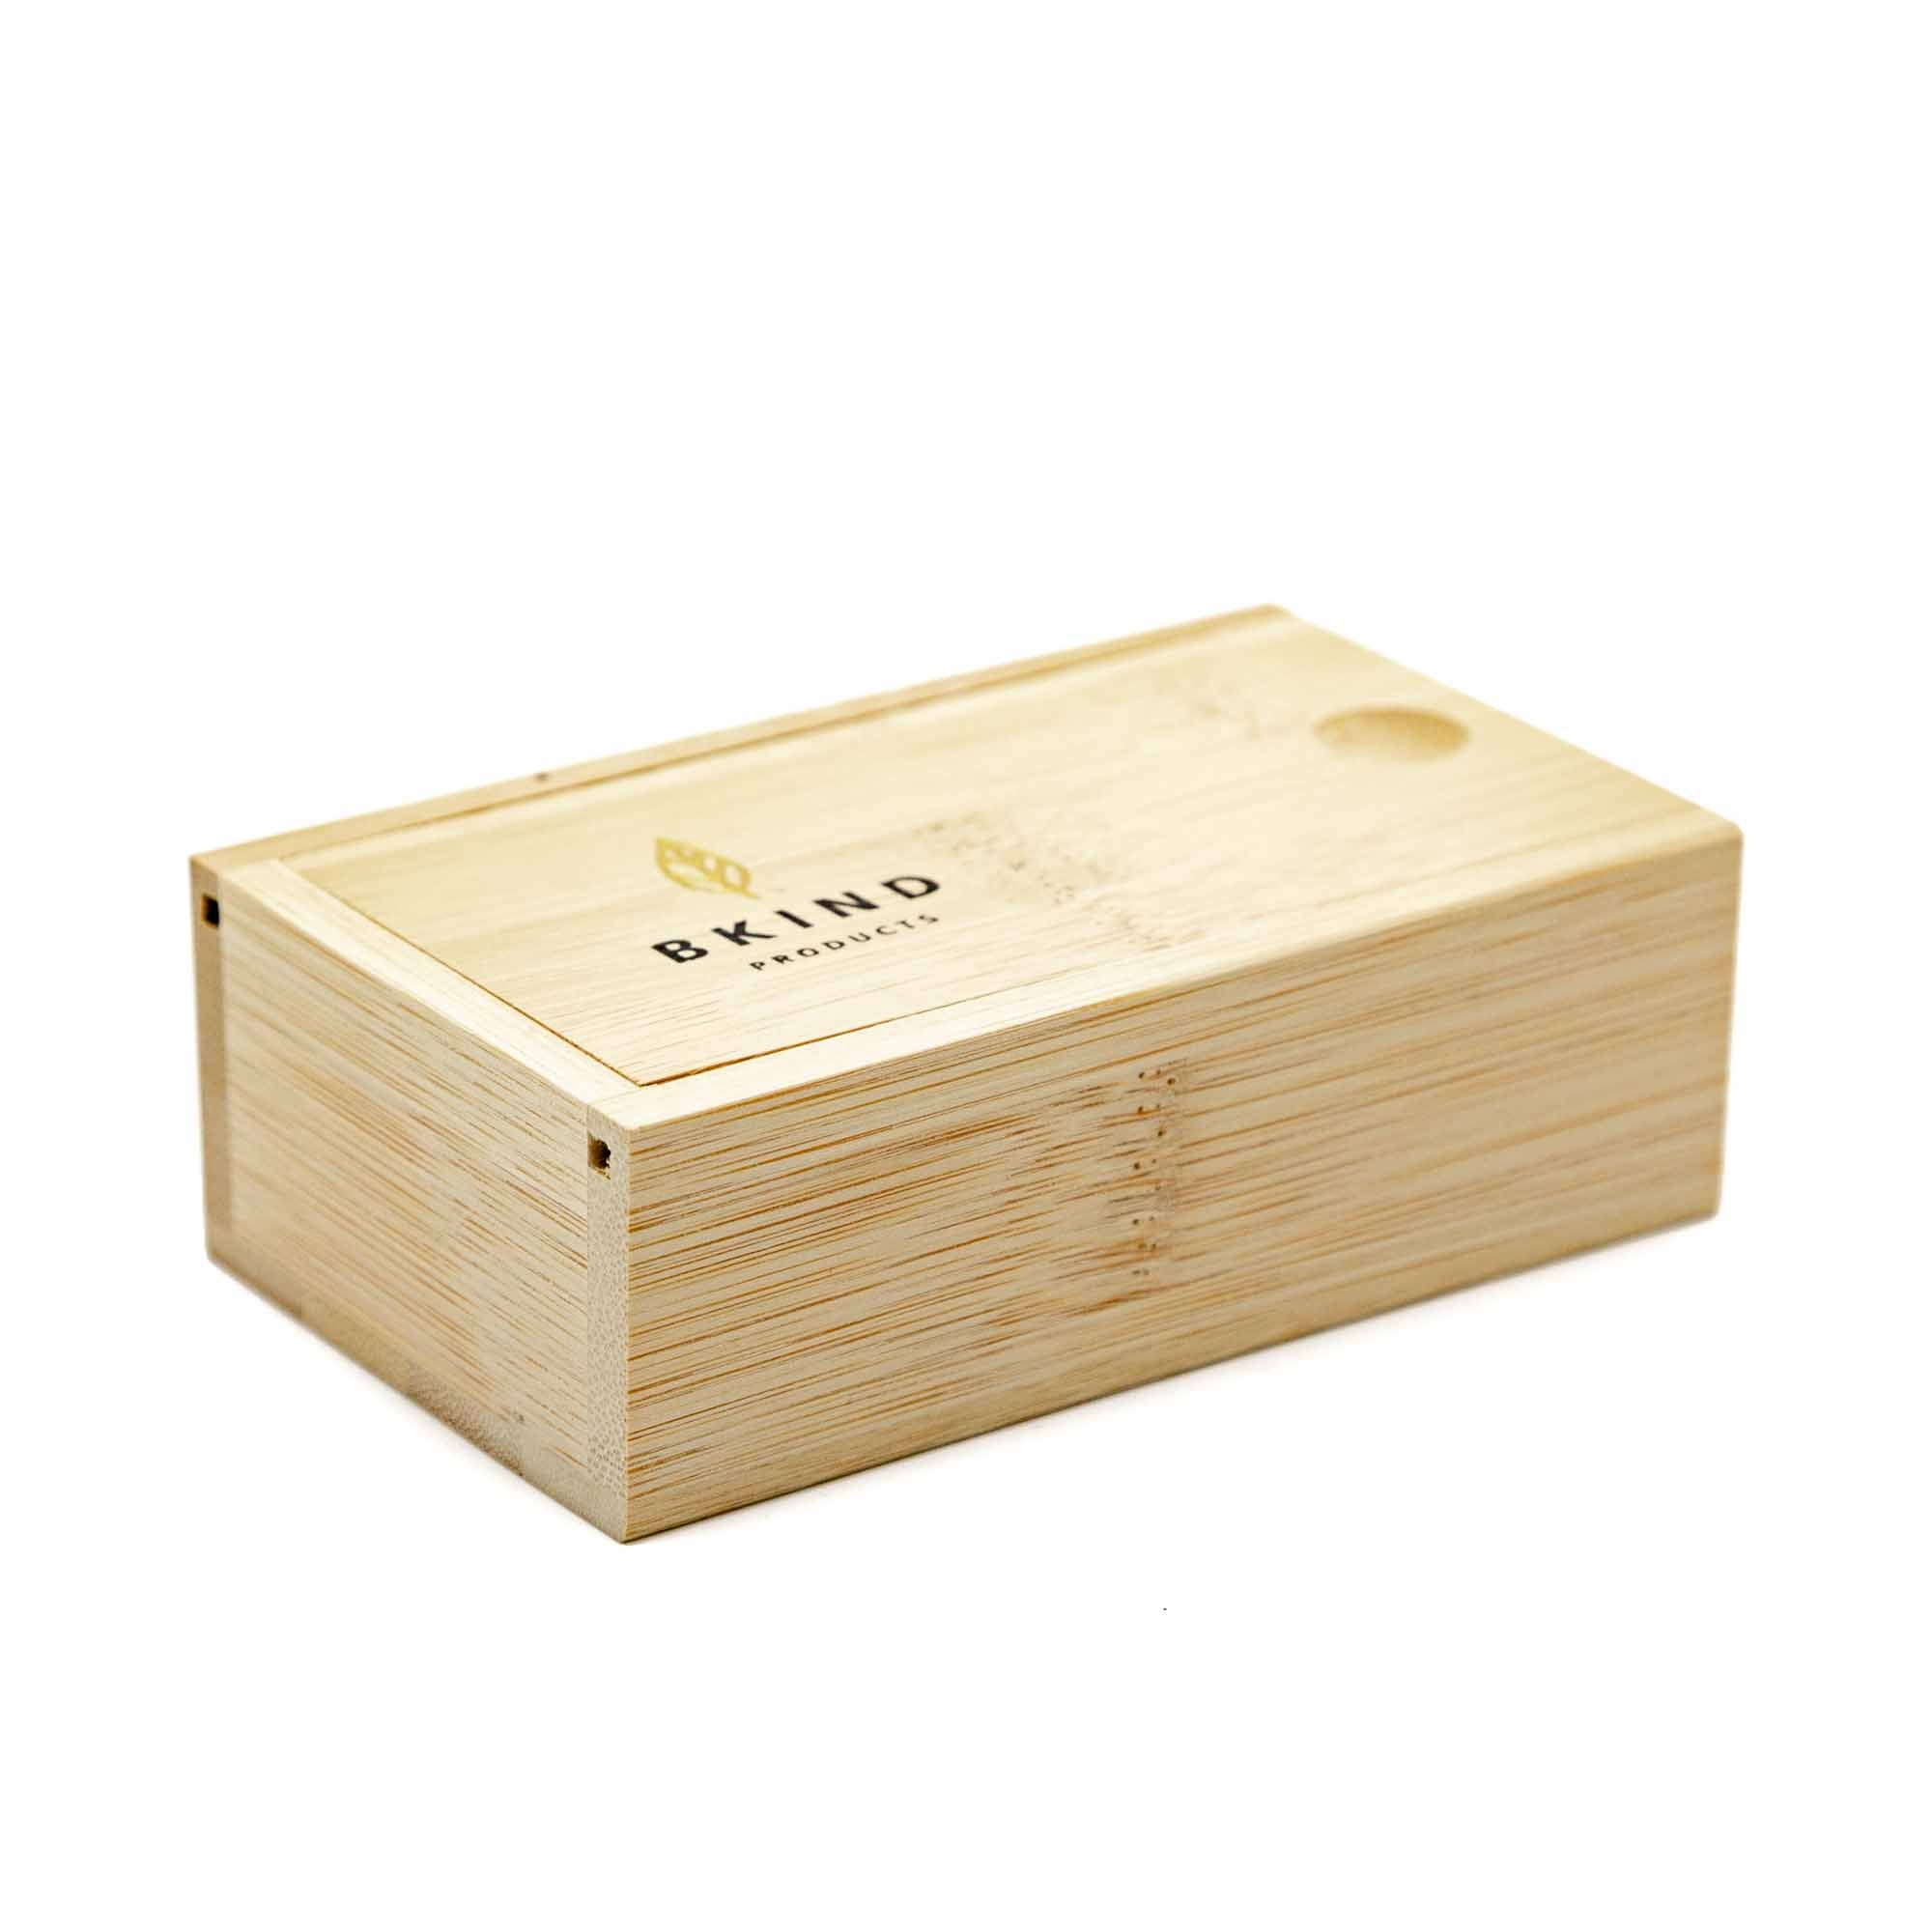 BKIND Bamboo Case for Shampoo/Conditioner - Mortise And Tenon